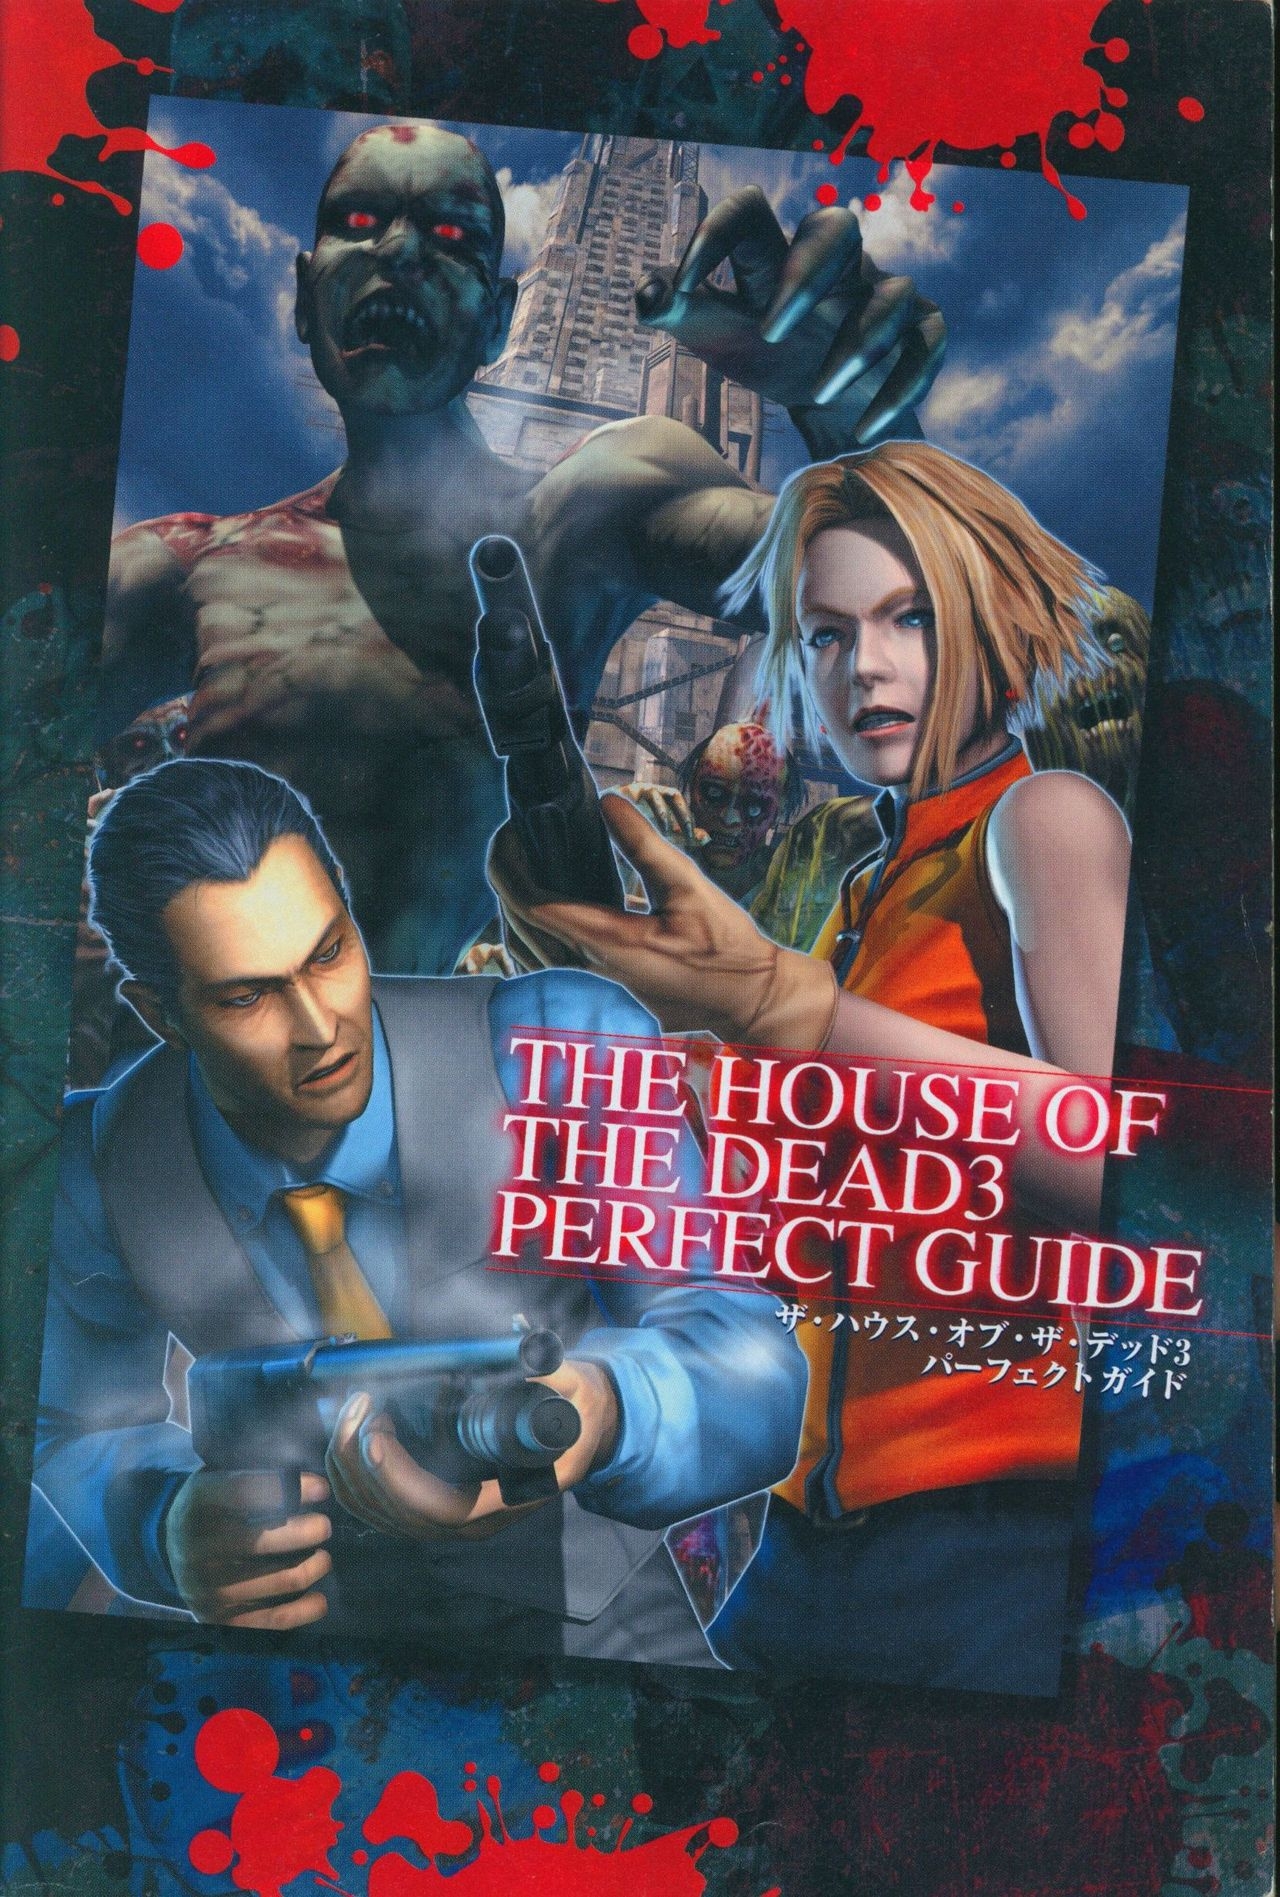 The House of the Dead 3 Perfect Guide 3